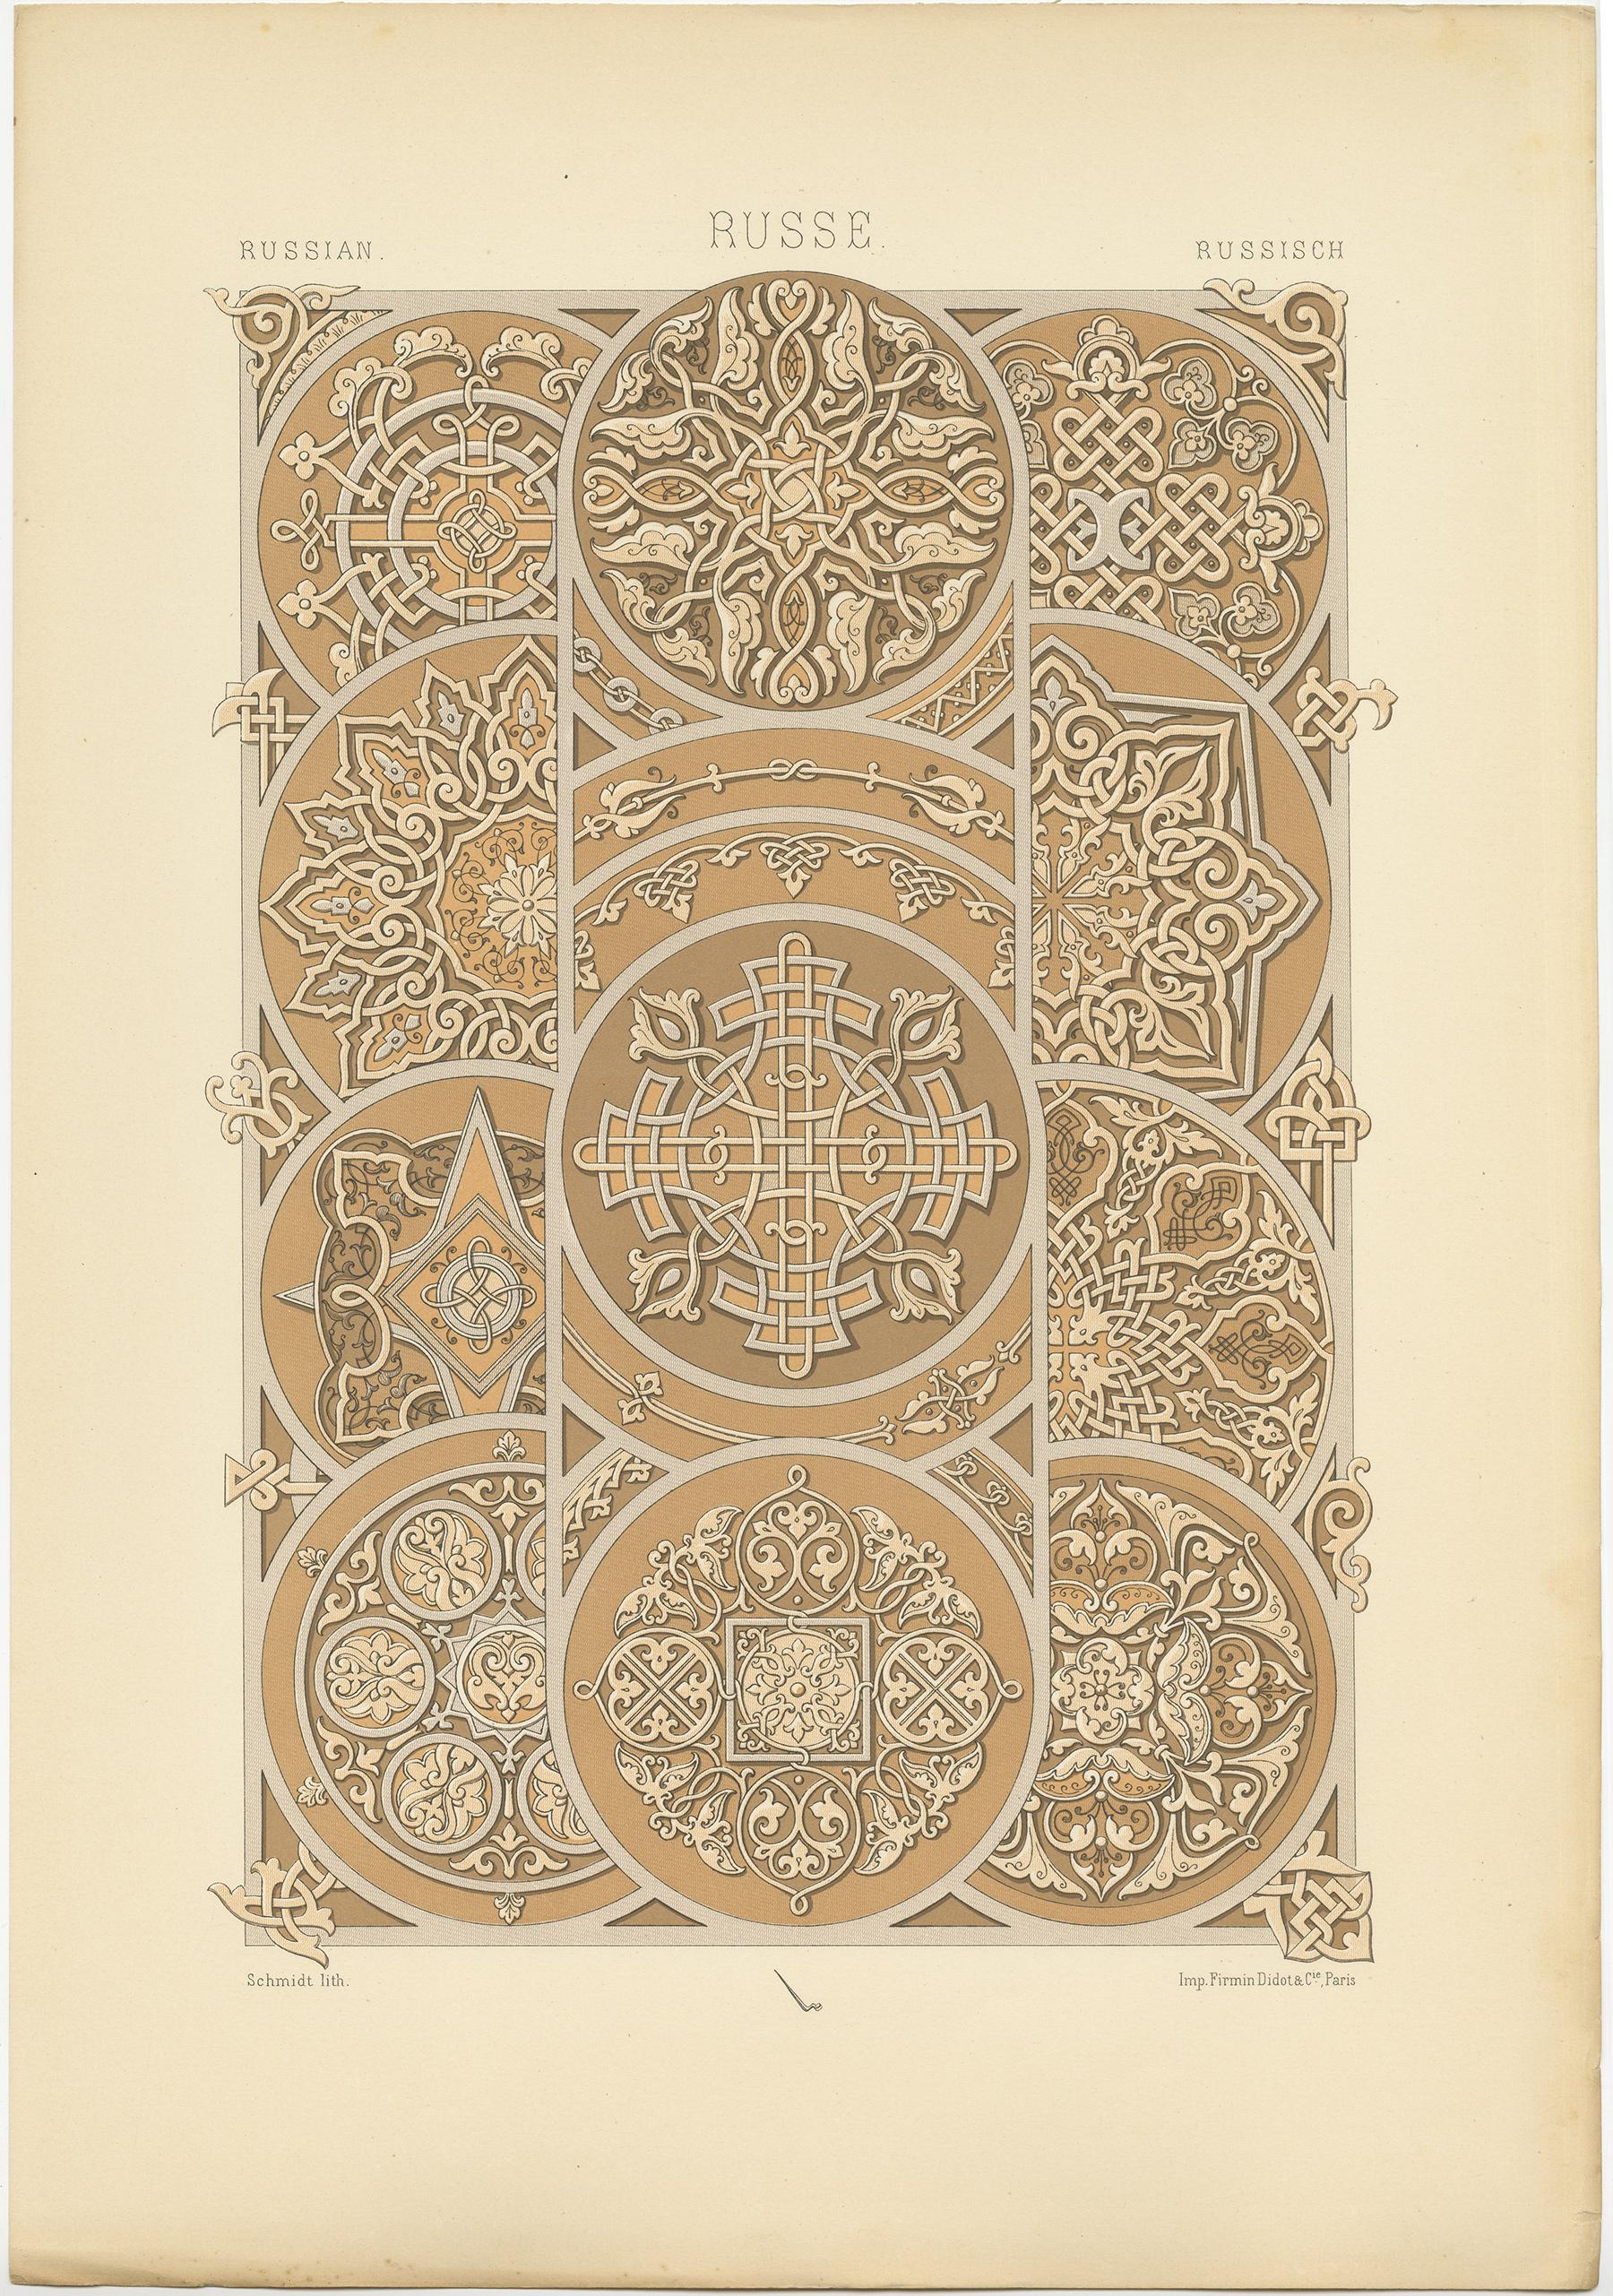 Antique print titled 'Russian - Russe - Russische'. Chromolithograph of motifs from engraved and chased metal ornaments. This print originates from 'l'Ornement Polychrome' by Auguste Racinet. Published circa 1890.